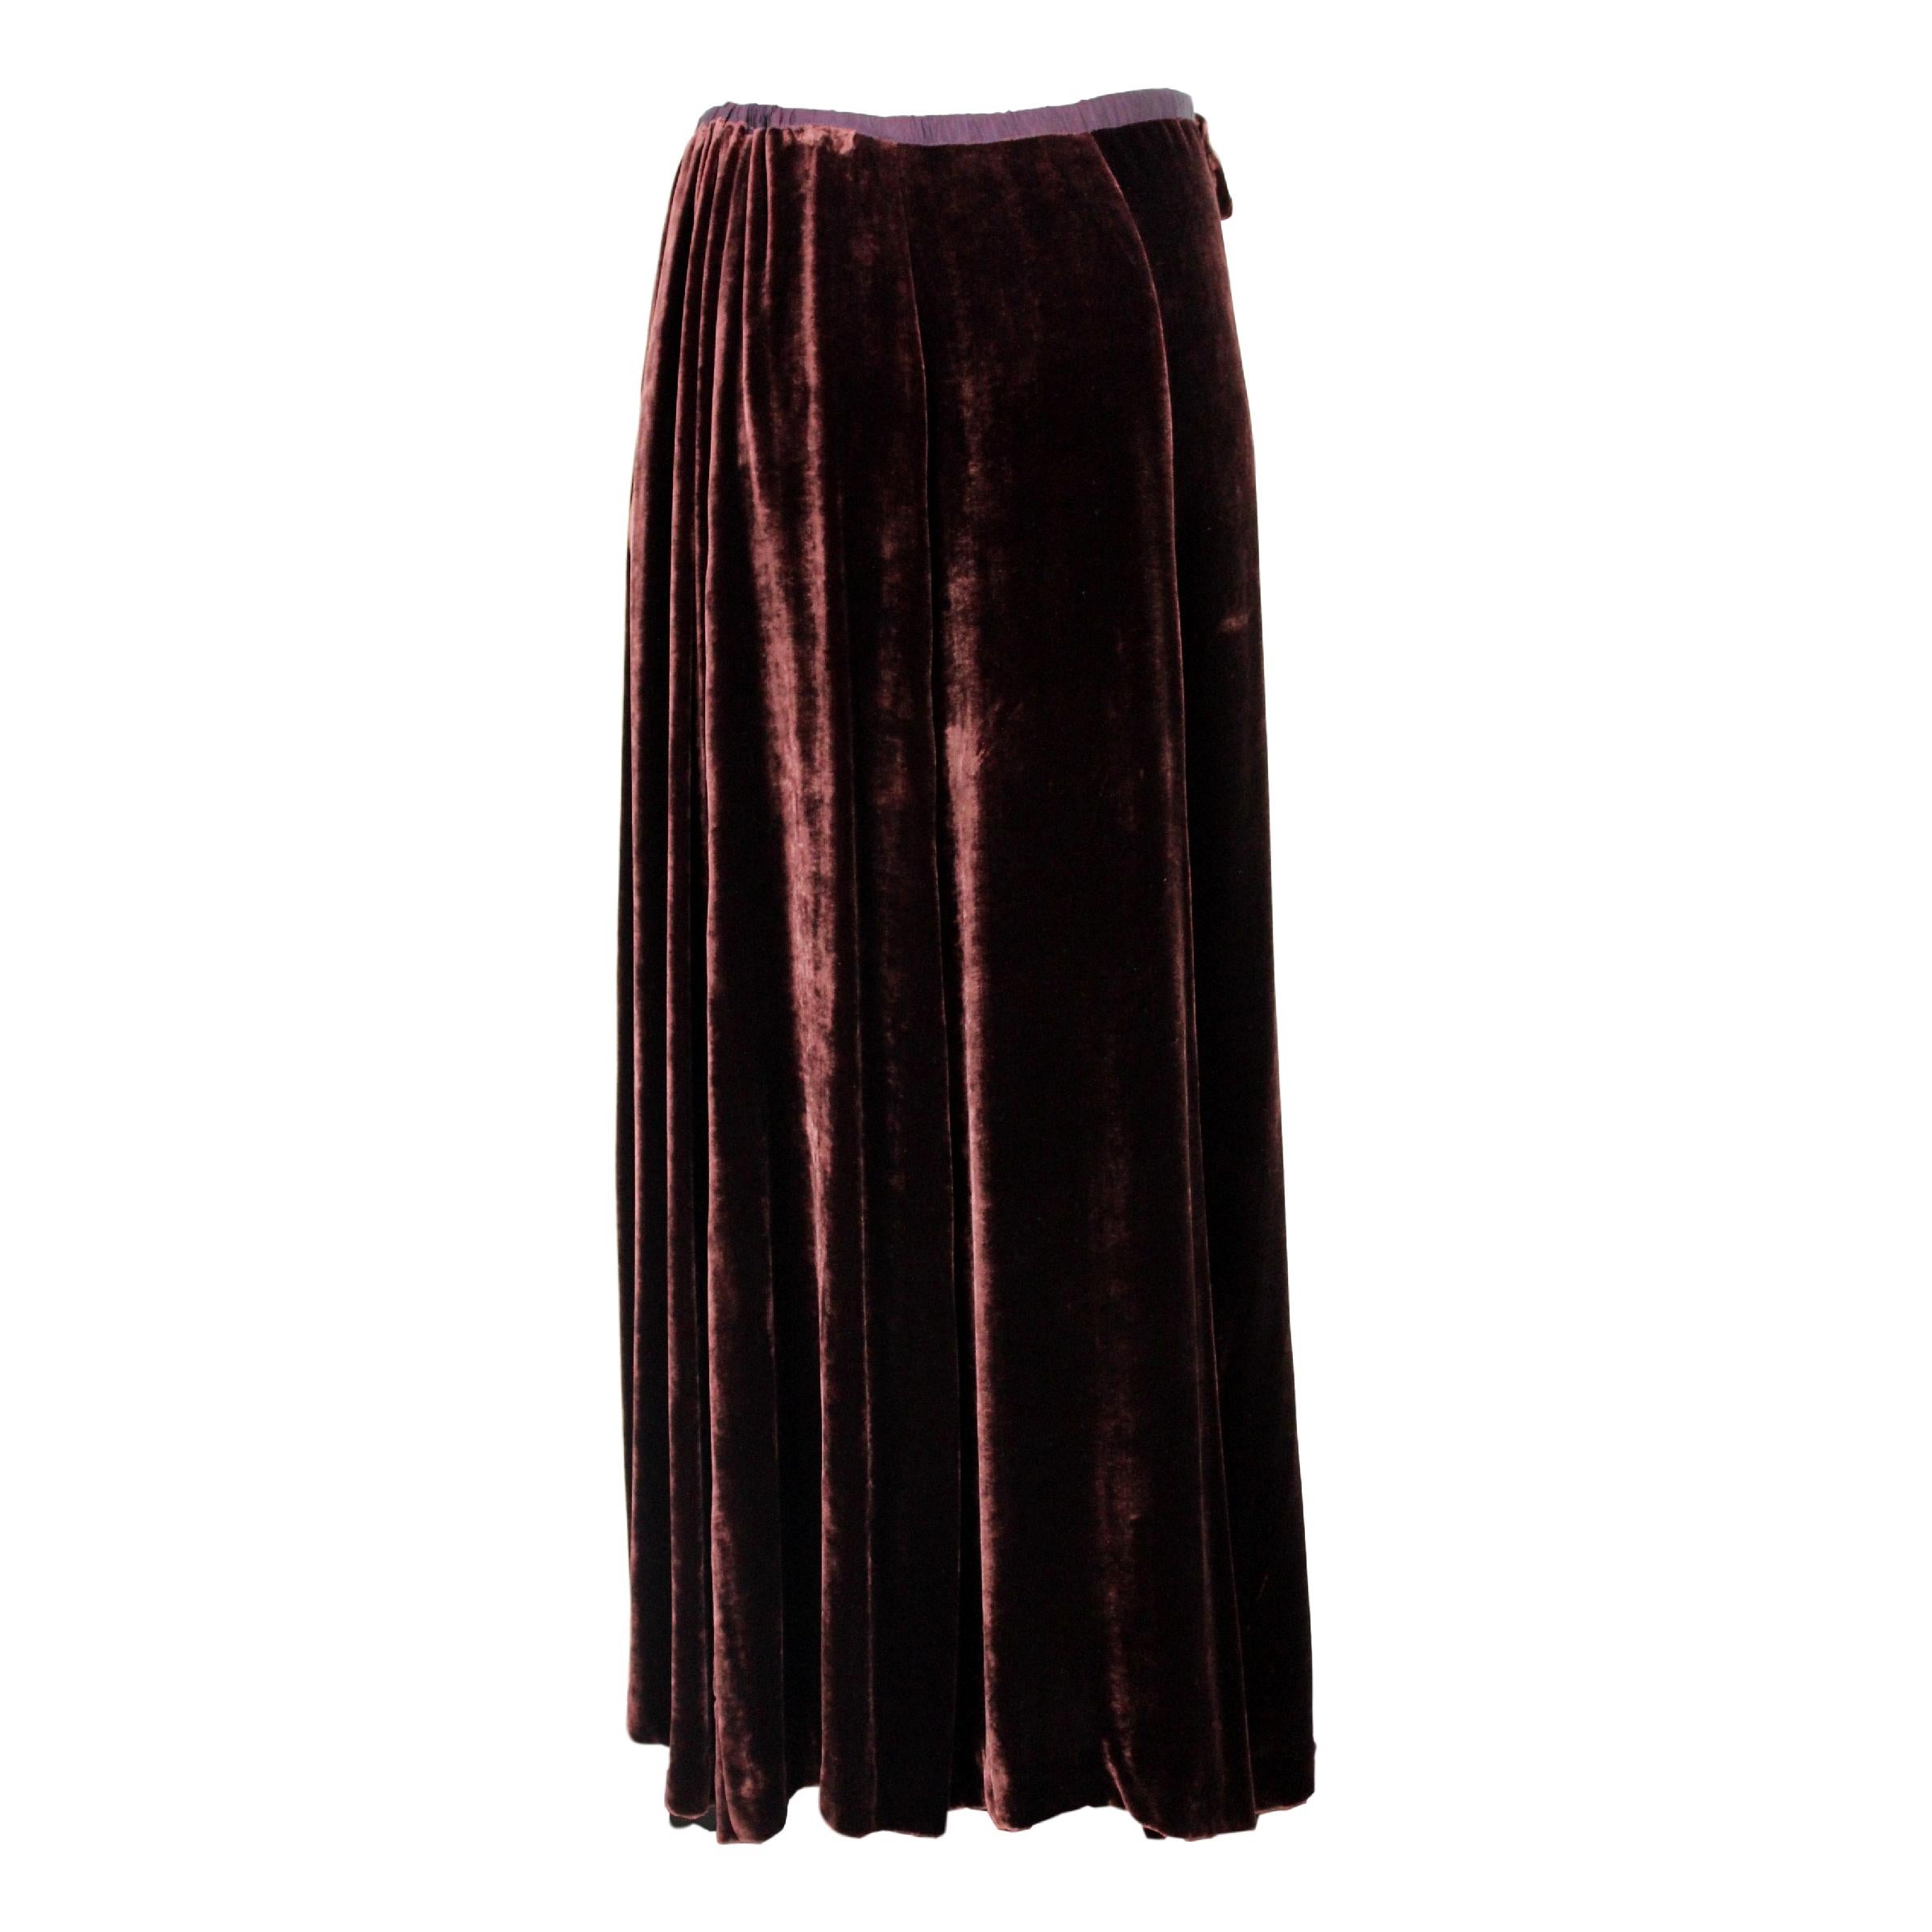 Vintage Dries Van Noten 90s long skirt, brown color, 86% rayon 14% silk, velvet effect. Two pockets on the sides, adjustable elasticated waistband and hidden buttons along the entire length. Made in Belgium. Excellent vintage condition. 

Size: 42